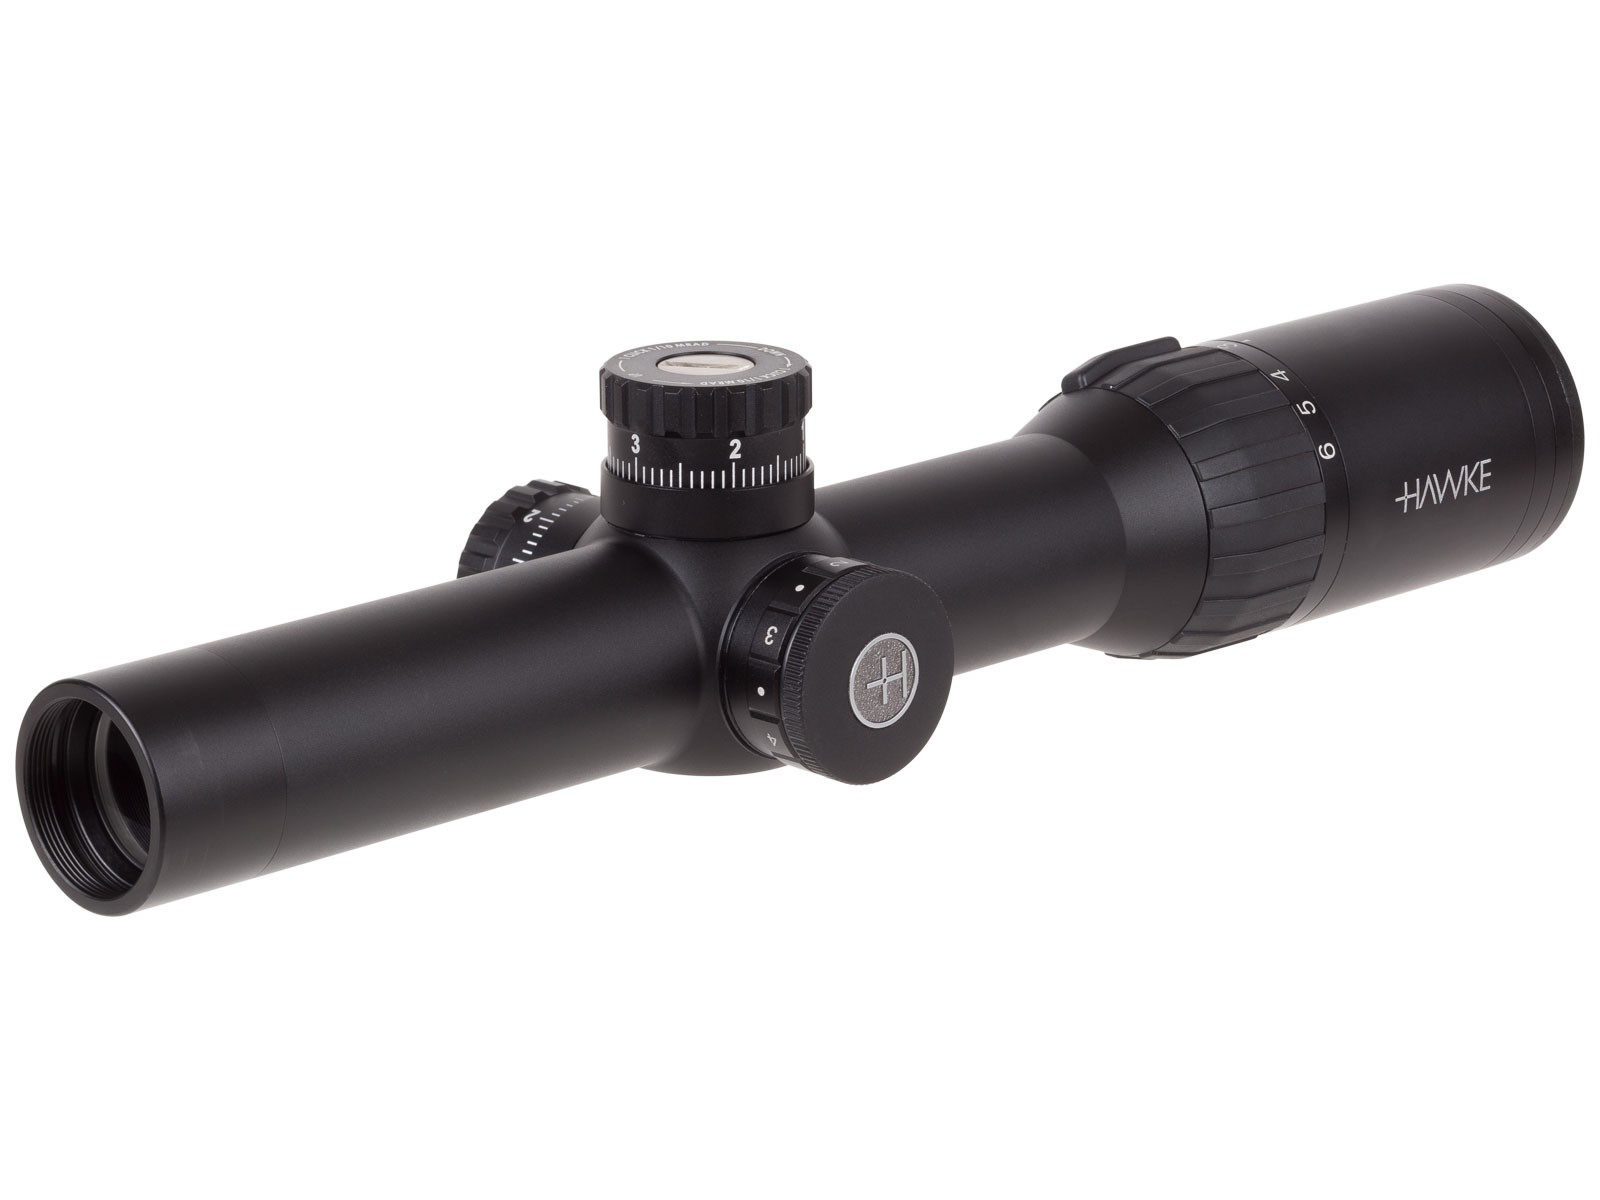 Hawke Sport Optics 1-6x24 Frontier 30 Rifle Scope, Ill. Red Tactical Dot Reticle, 1/10 MRAD, 30mm Tube